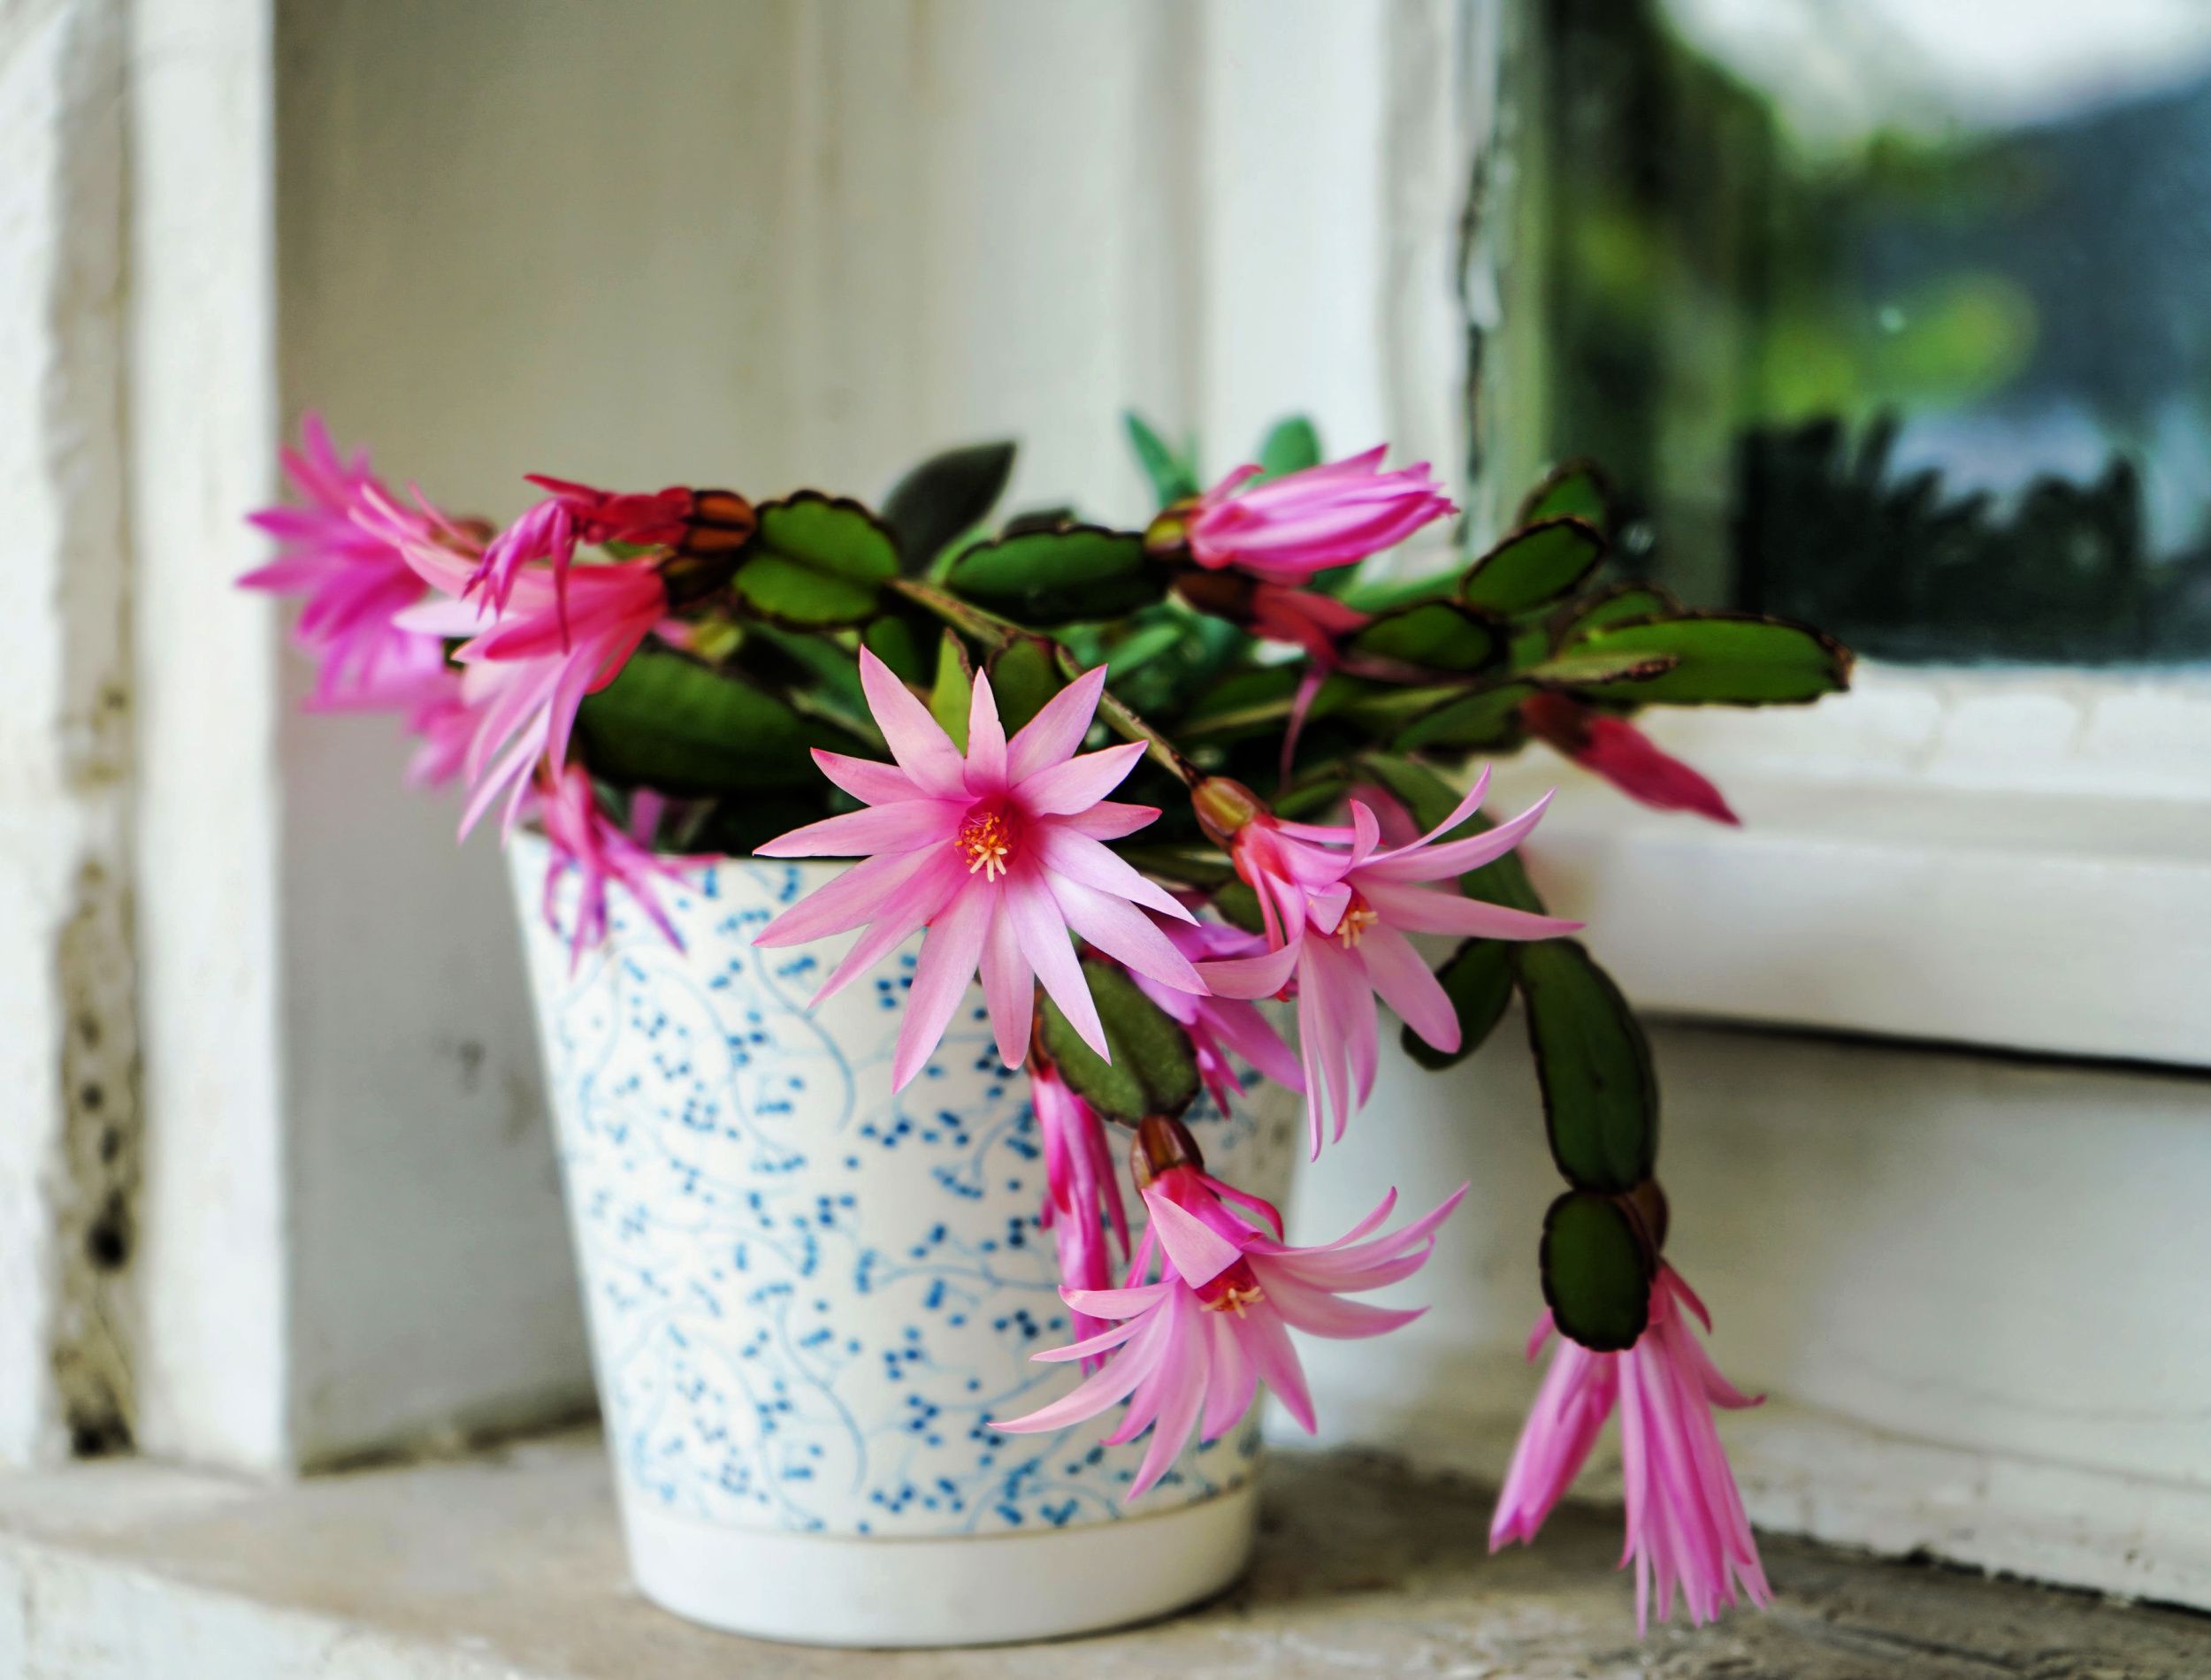 Fuchsia flowered Christmas cactus bloomed on a window sill.